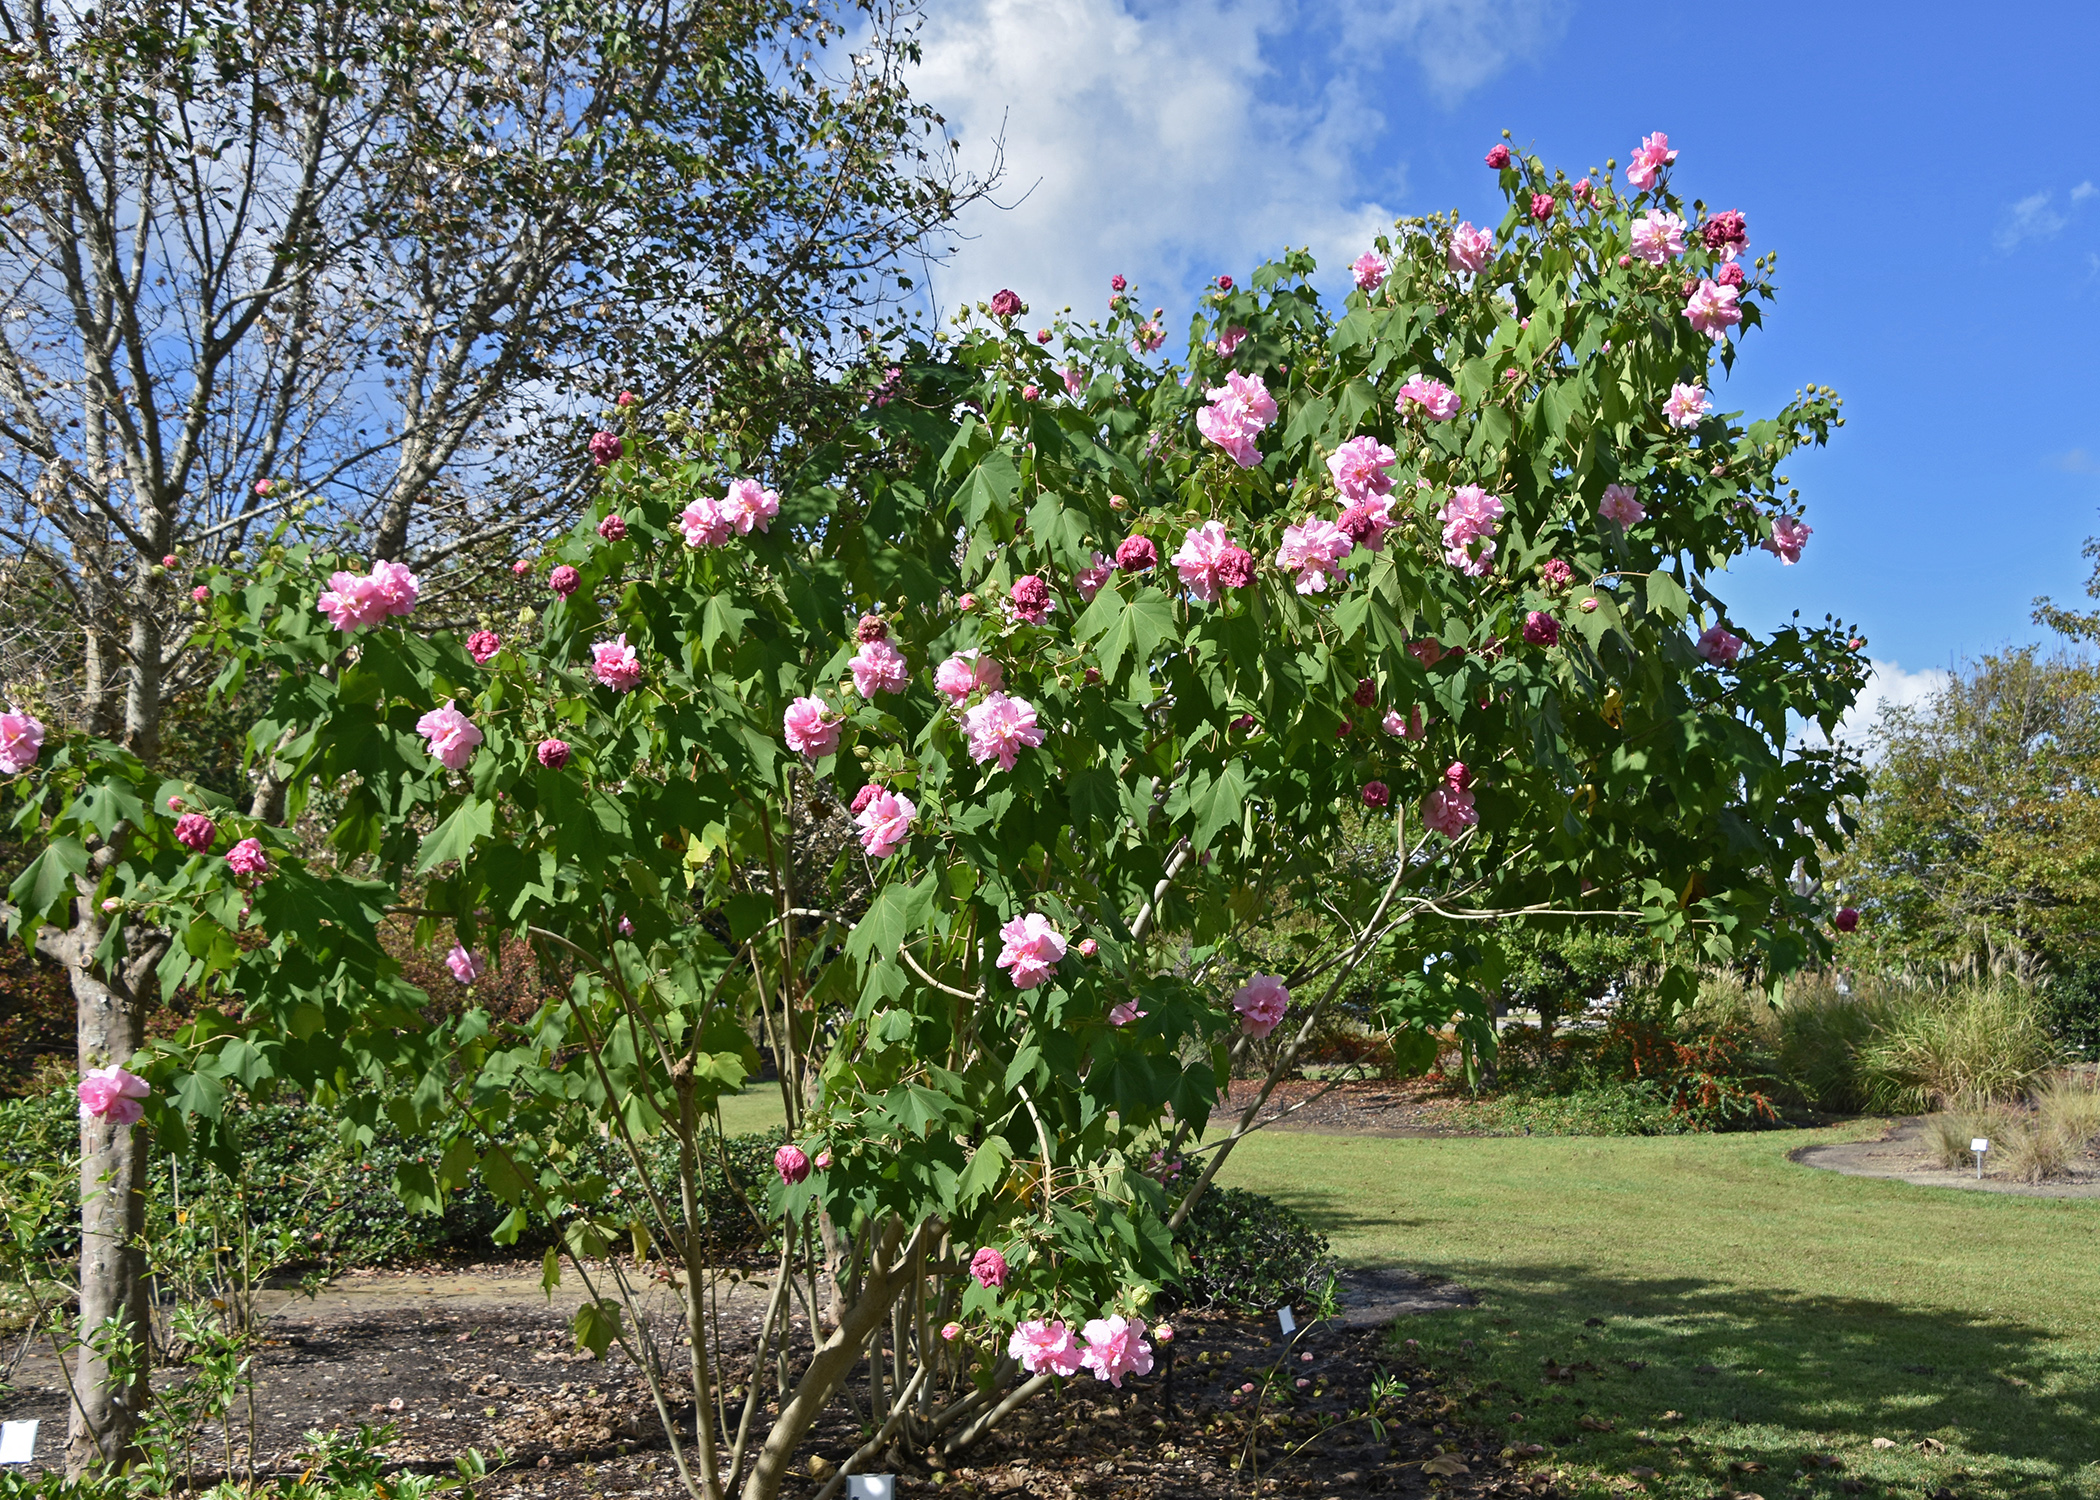 Confederate Rose works best as a landscape specimen to properly display its gorgeous flowers that bloom in prodigious numbers. (Photo by MSU Extension/Gary Bachman)